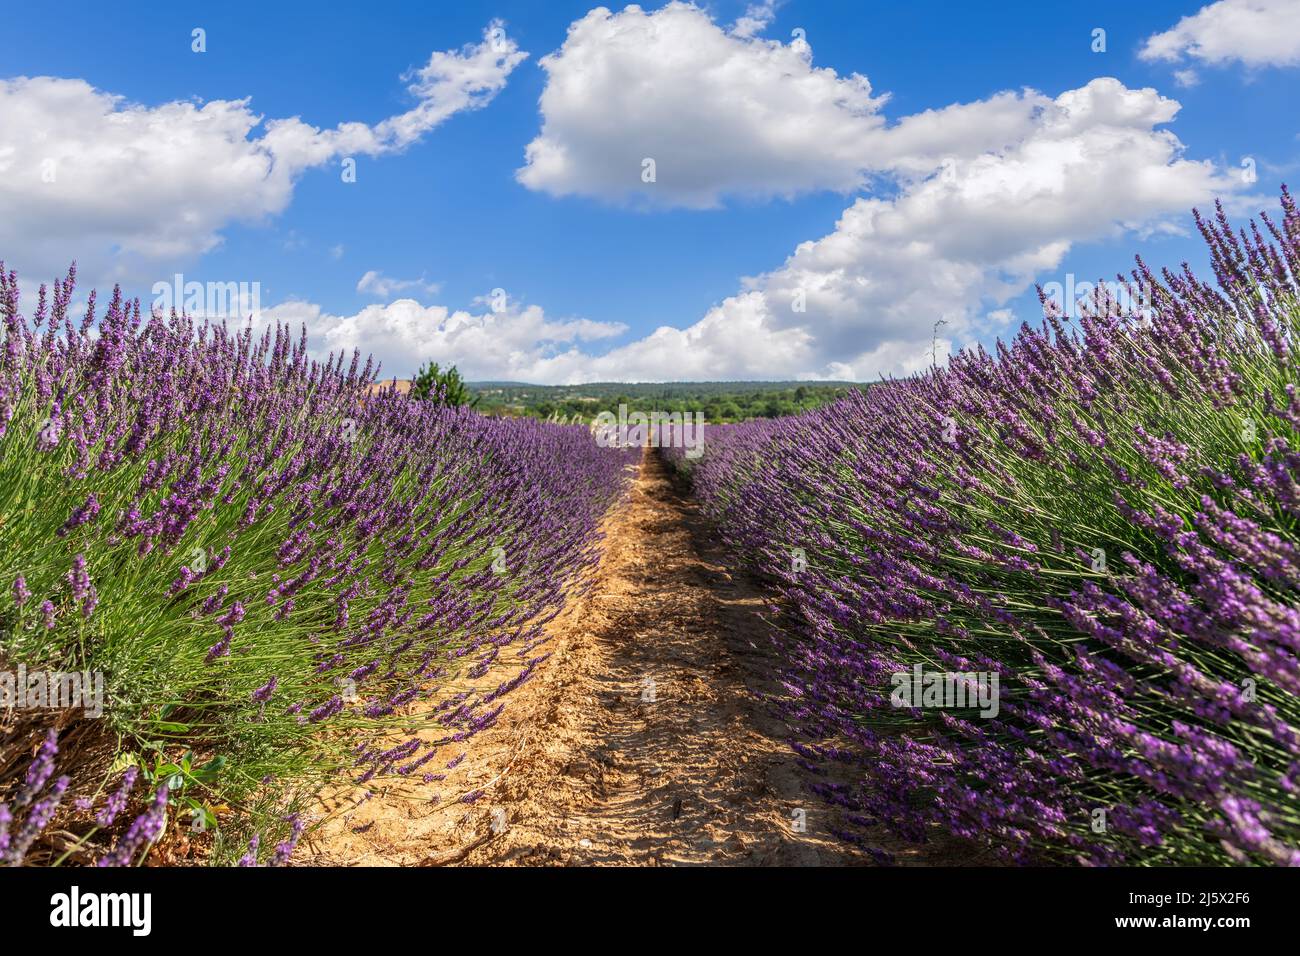 Lavender Grosso large grower and blooms heavily in summertime. Vaucluse, Provence, France Stock Photo